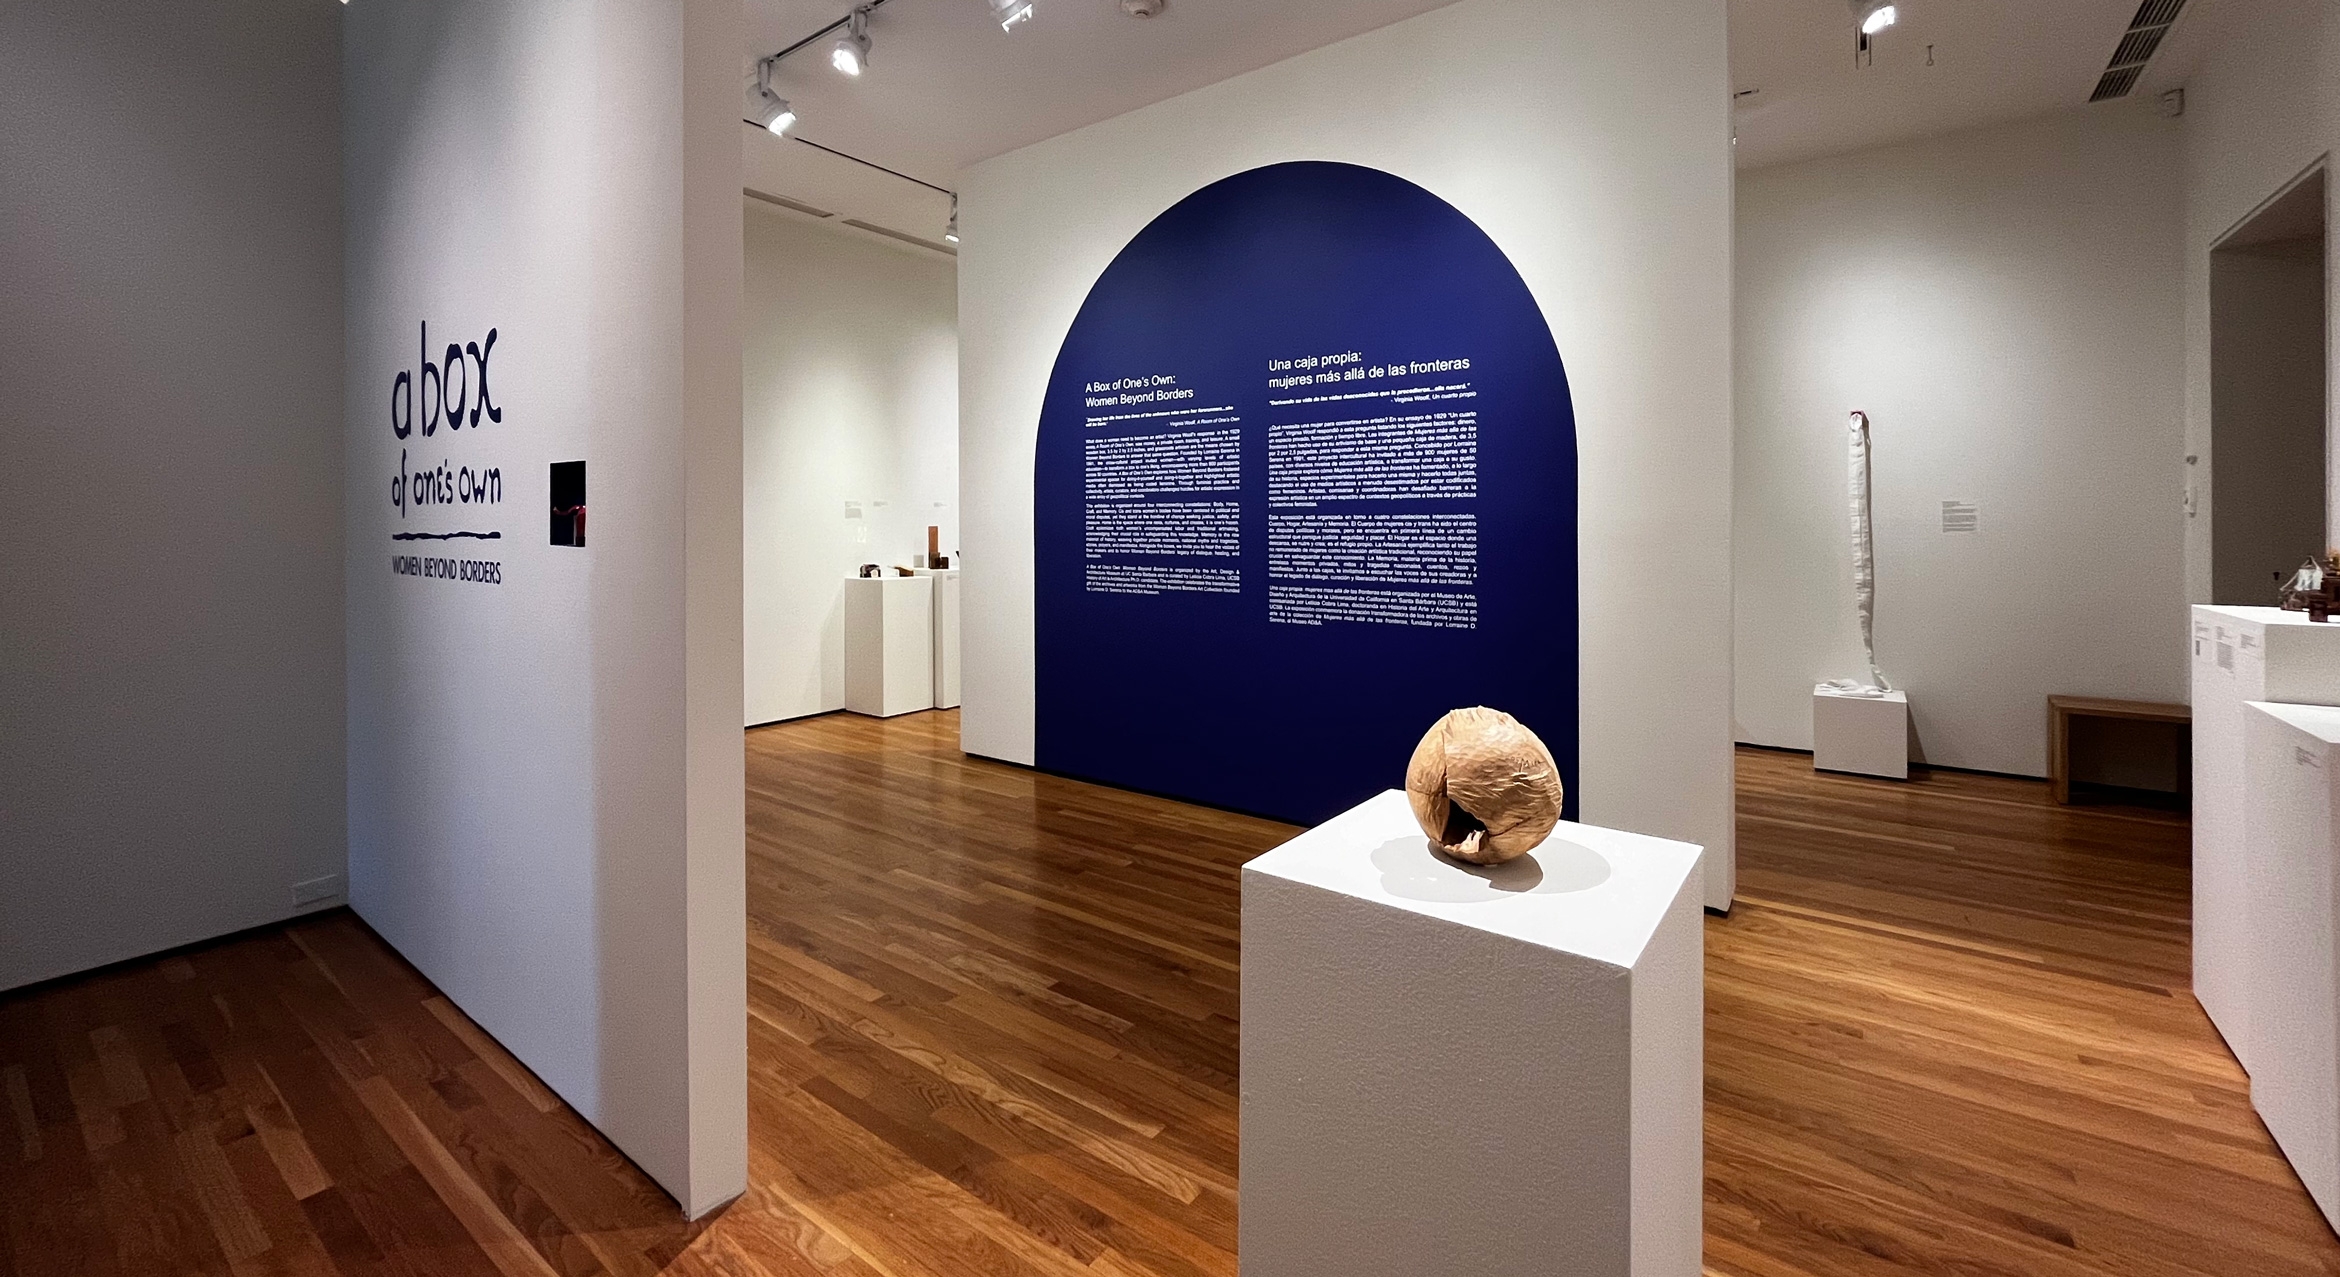 installation view in gallery with blue arc panel